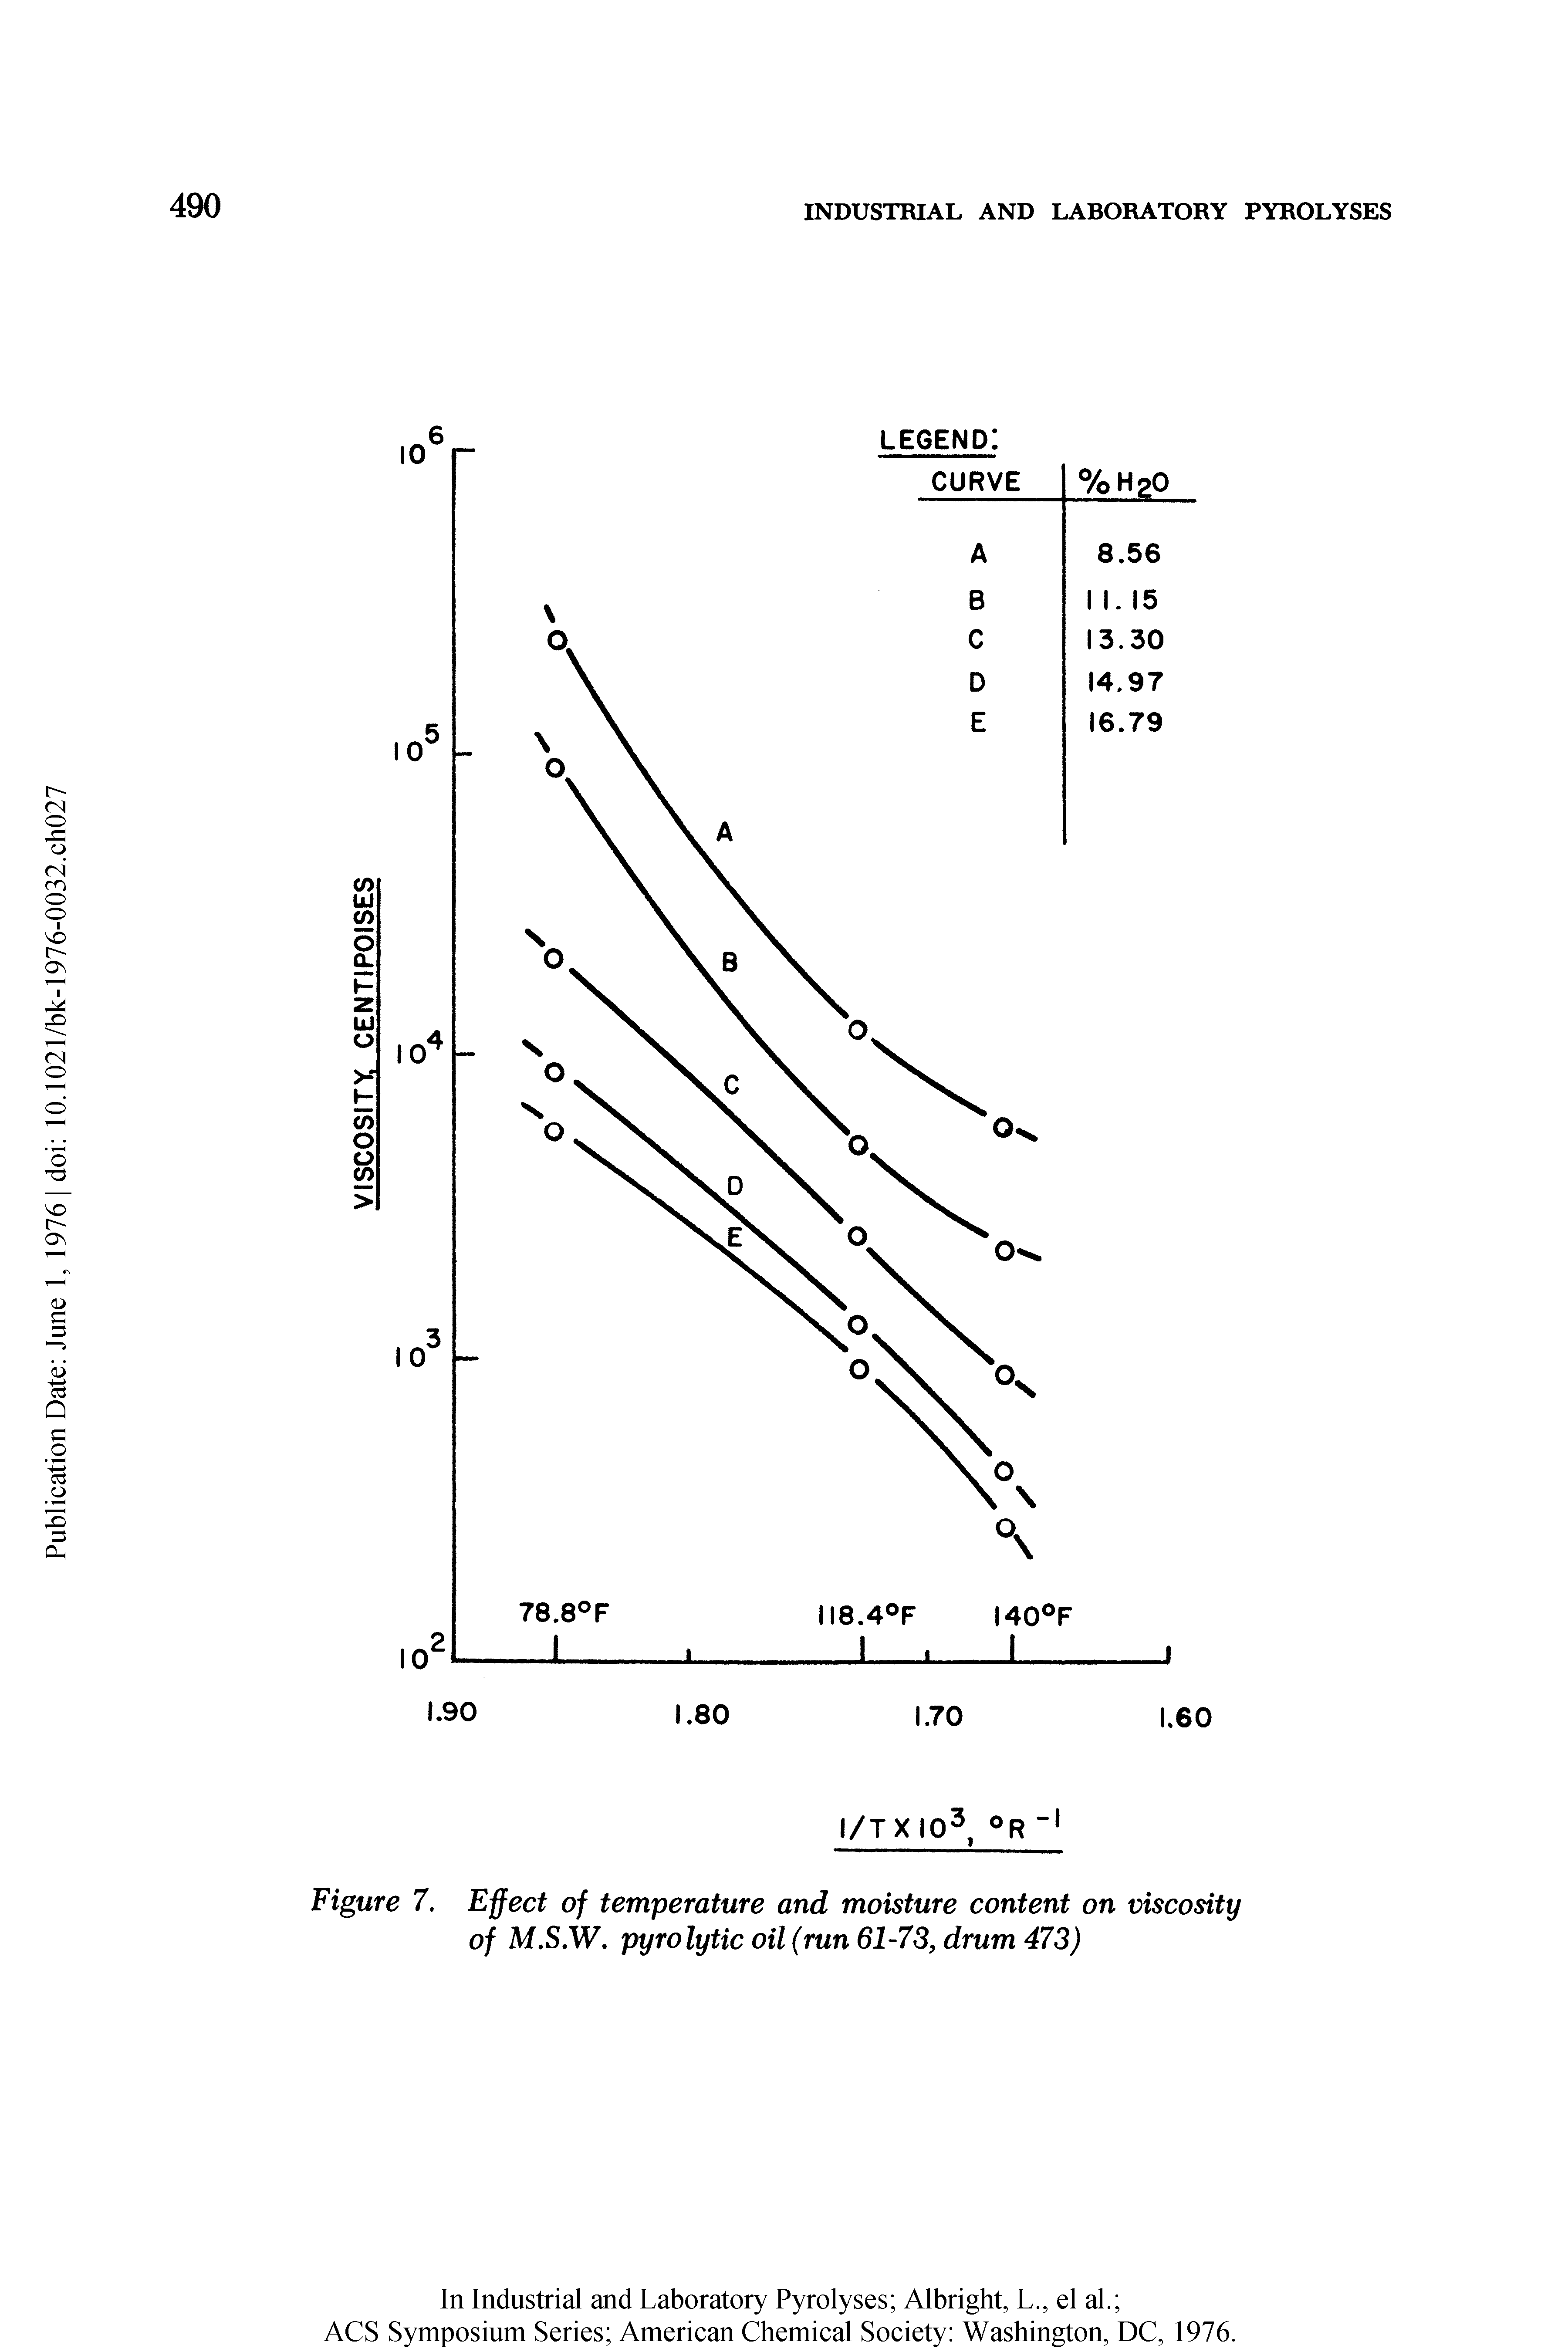 Figure 7. Effect of temperature and moisture content on viscosity of M.S.W. pyrolytic oil (run 61-73, drum 473)...